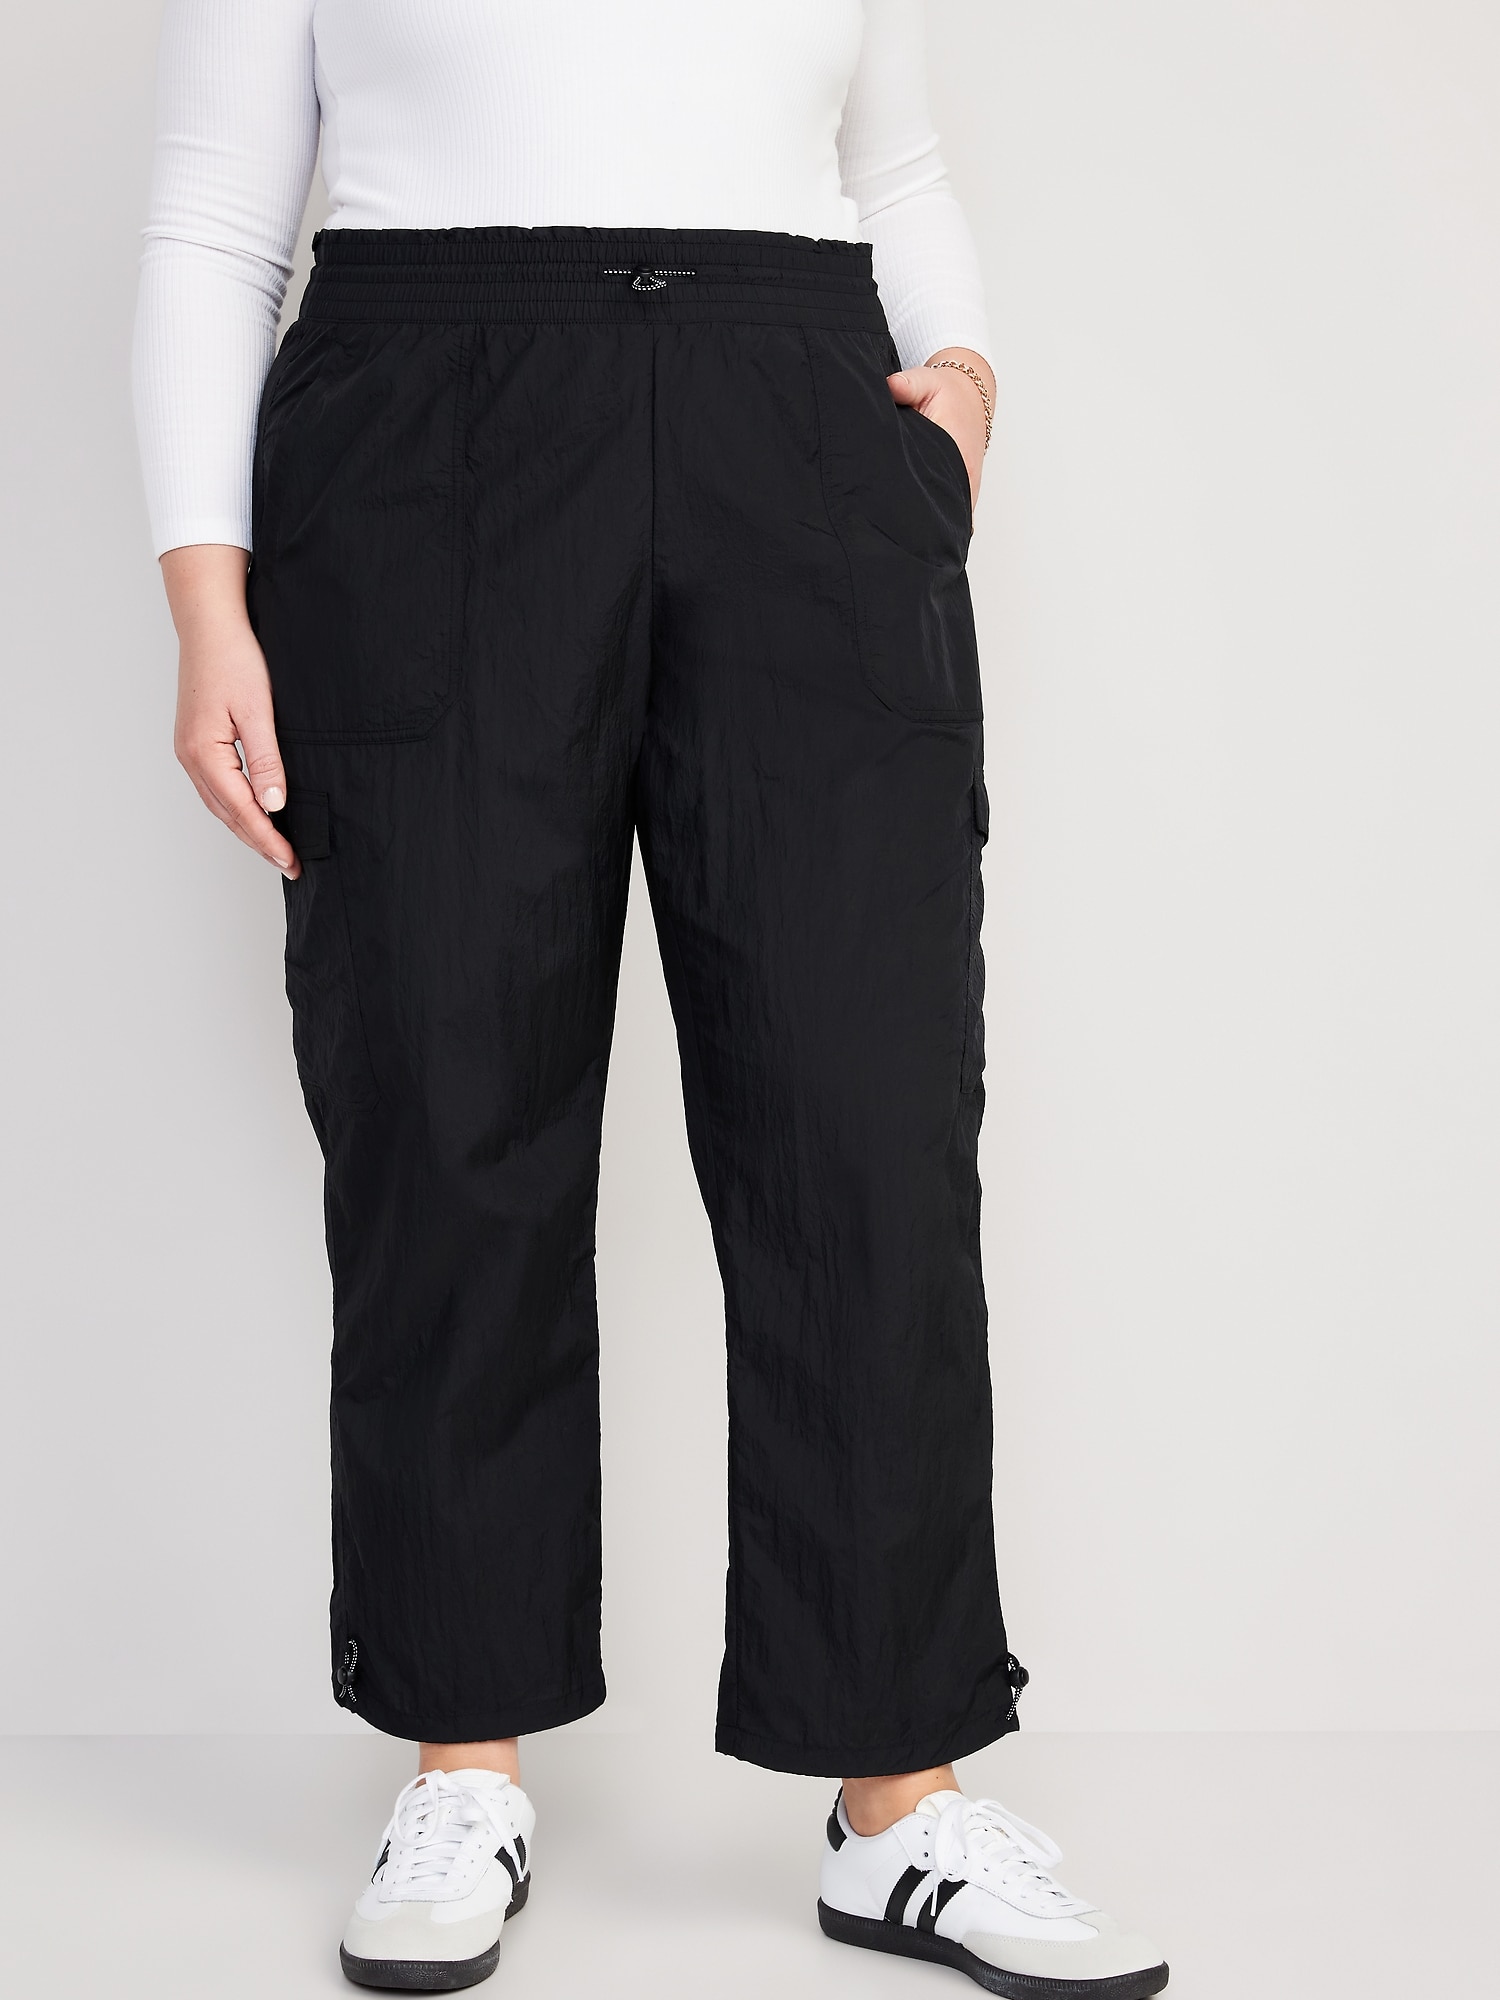 High-Waisted Parachute Cargo Jogger Ankle Pants | Old Navy